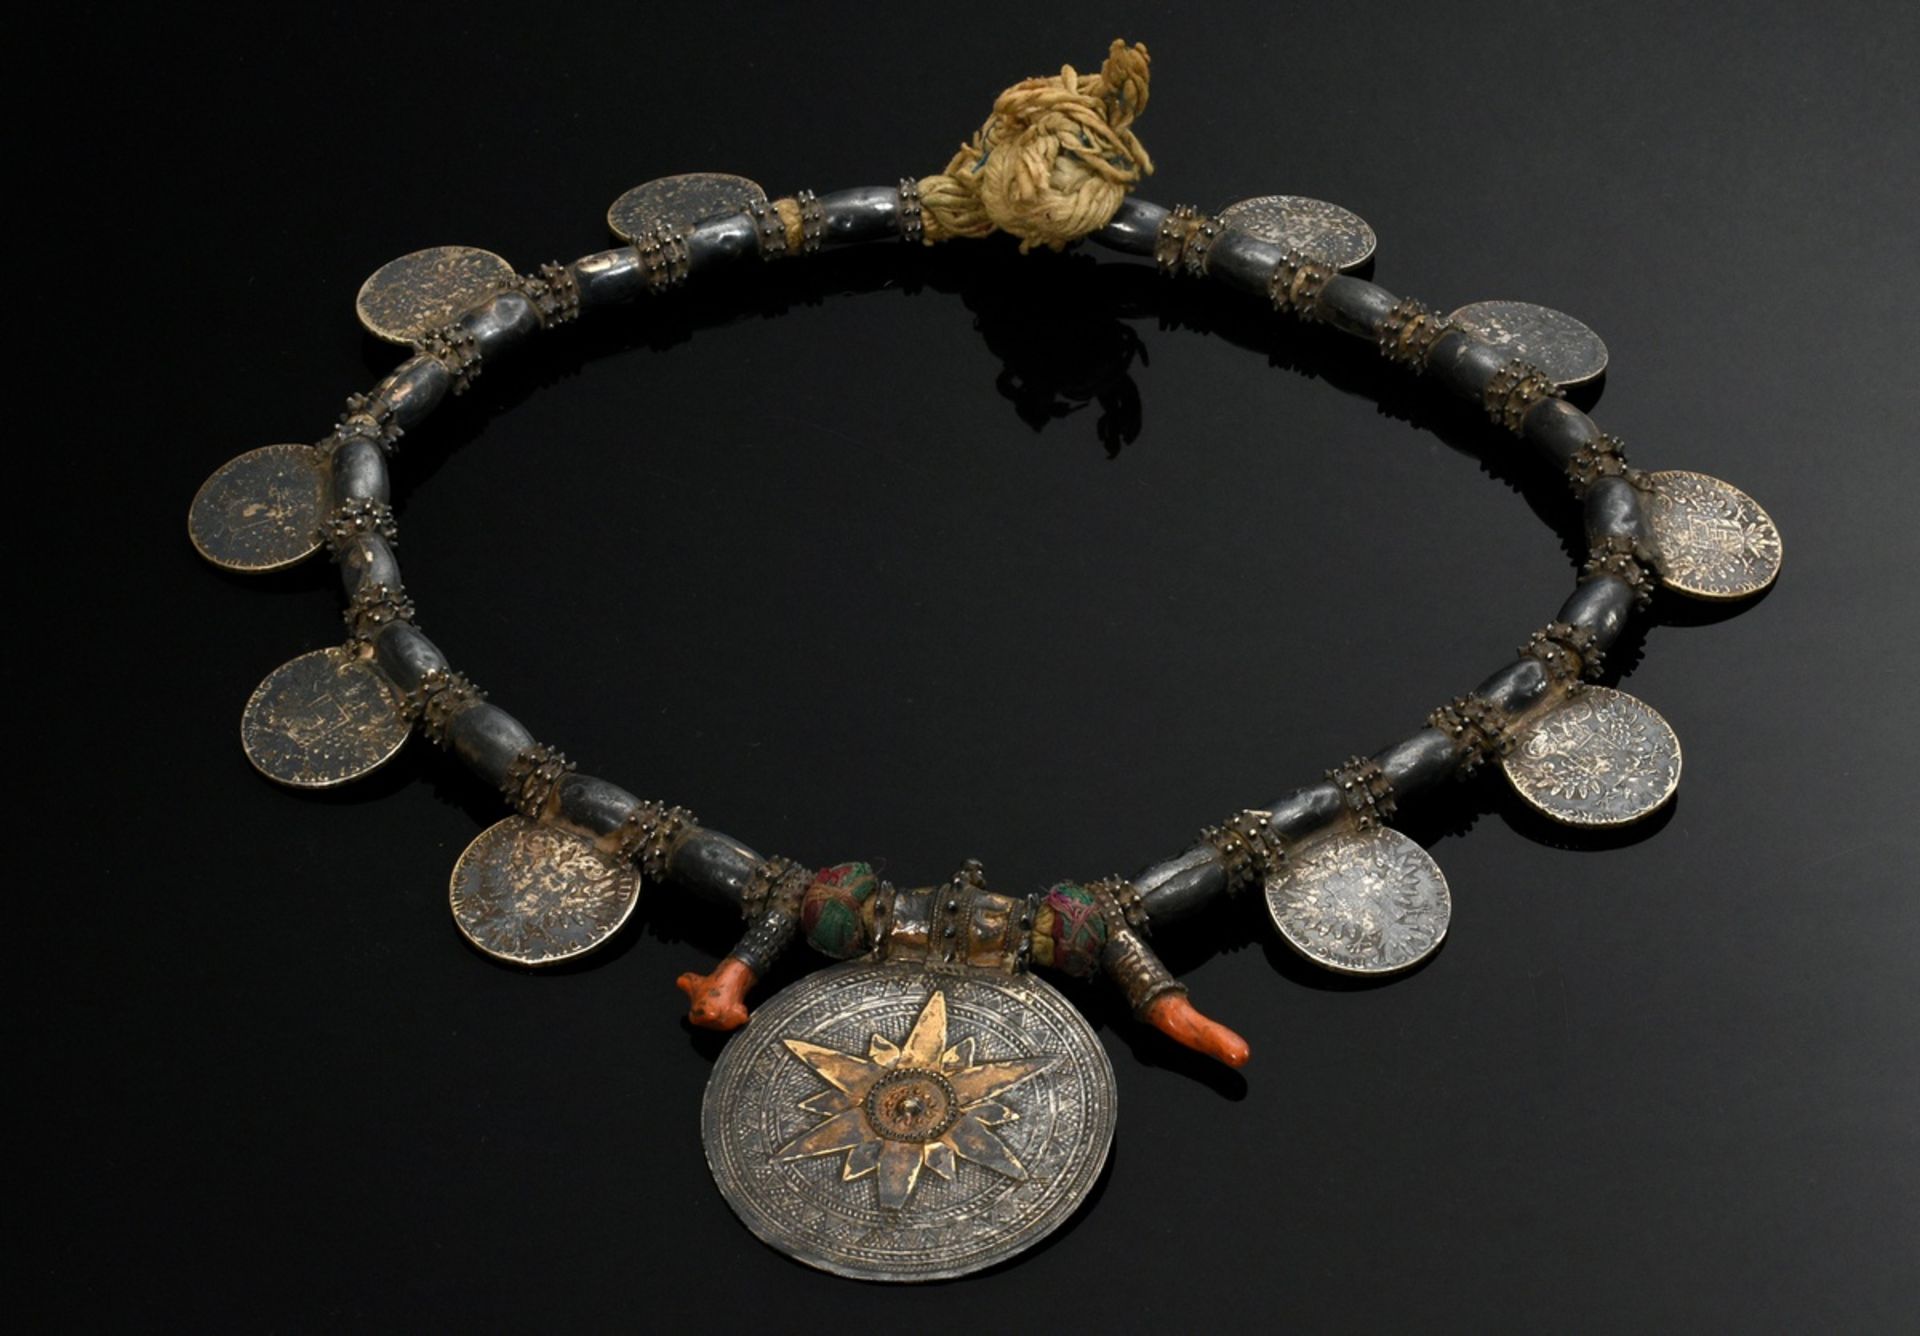 2 Various necklaces "Hirz" or "Sumpt", Oman Wahiba sand Bedouins, large spiked beads with Maria The - Image 13 of 14